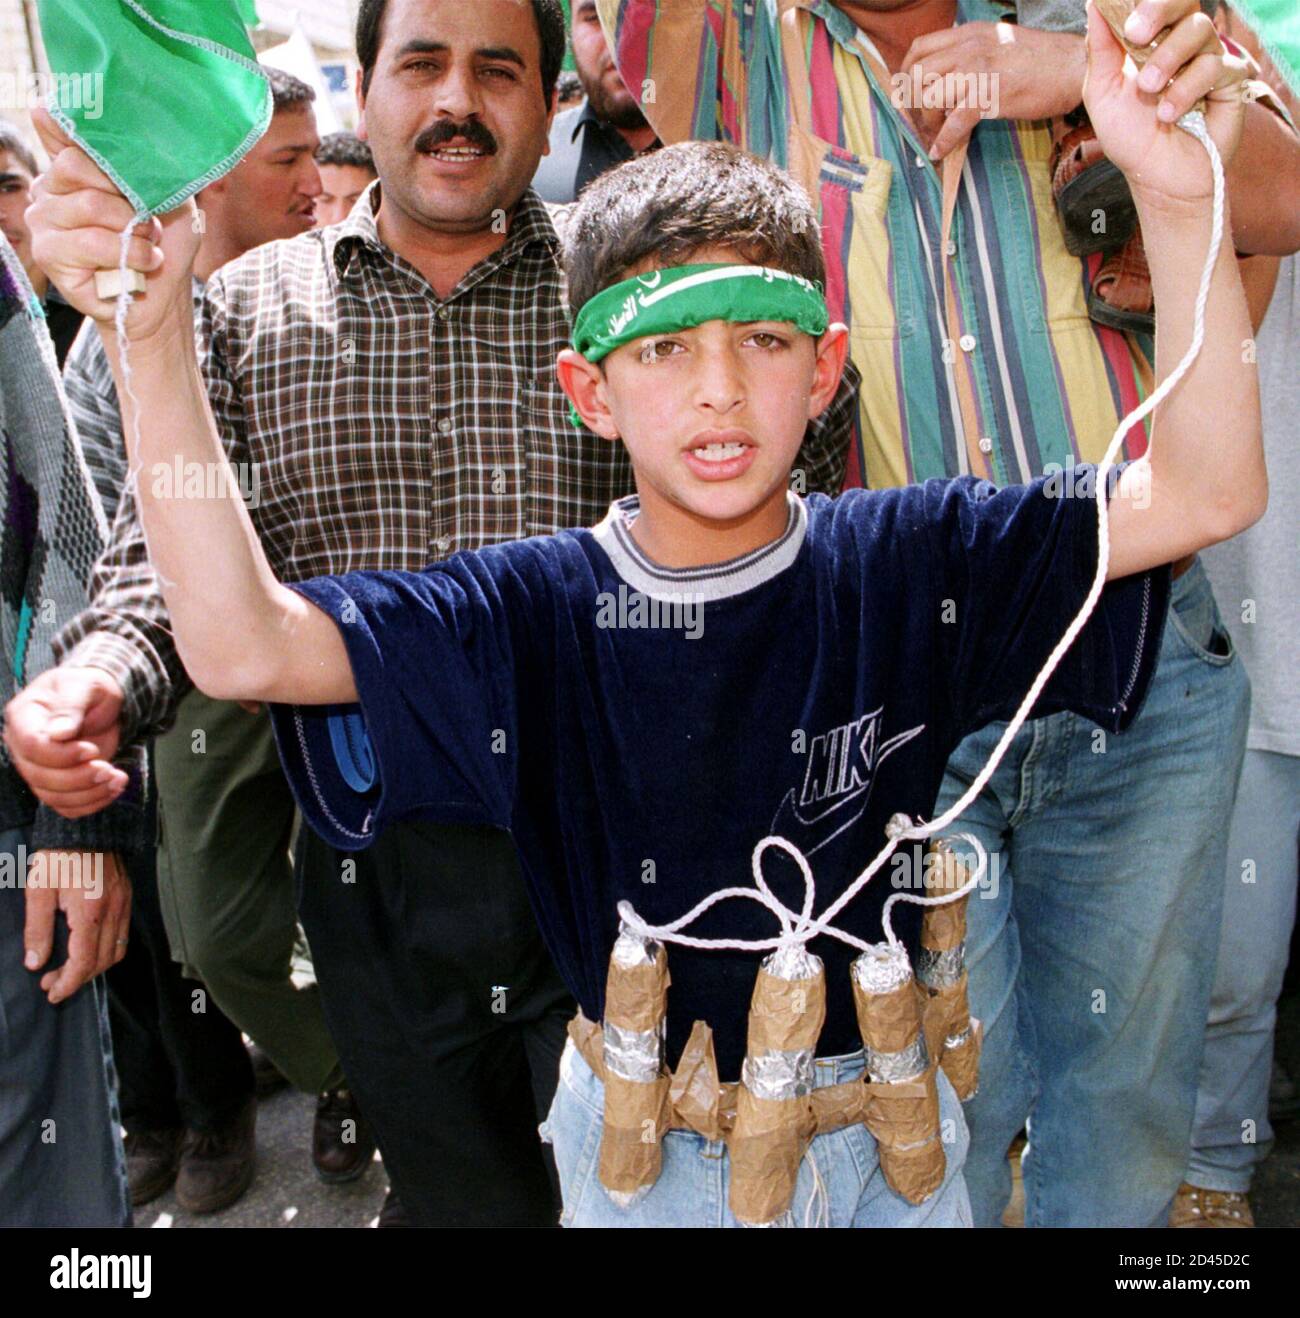 a-palestinian-boy-dresses-like-a-suicide-bomber-during-a-land-day-demonstration-in-the-west-bank-city-of-ramallah-march-30-2001-israeli-arabs-took-to-the-streets-again-on-friday-for-the-annual-land-day-demonstrations-commemorating-the-25th-anniversary-of-the-killing-of-six-arab-israelis-by-israeli-soldiers-during-mass-protests-in-1976-clashes-erupted-throughout-the-west-bank-and-gaza-strip-and-israeli-troops-opened-fire-with-live-rounds-to-halt-palestinian-marches-ehcrb-2D45D2C.jpg